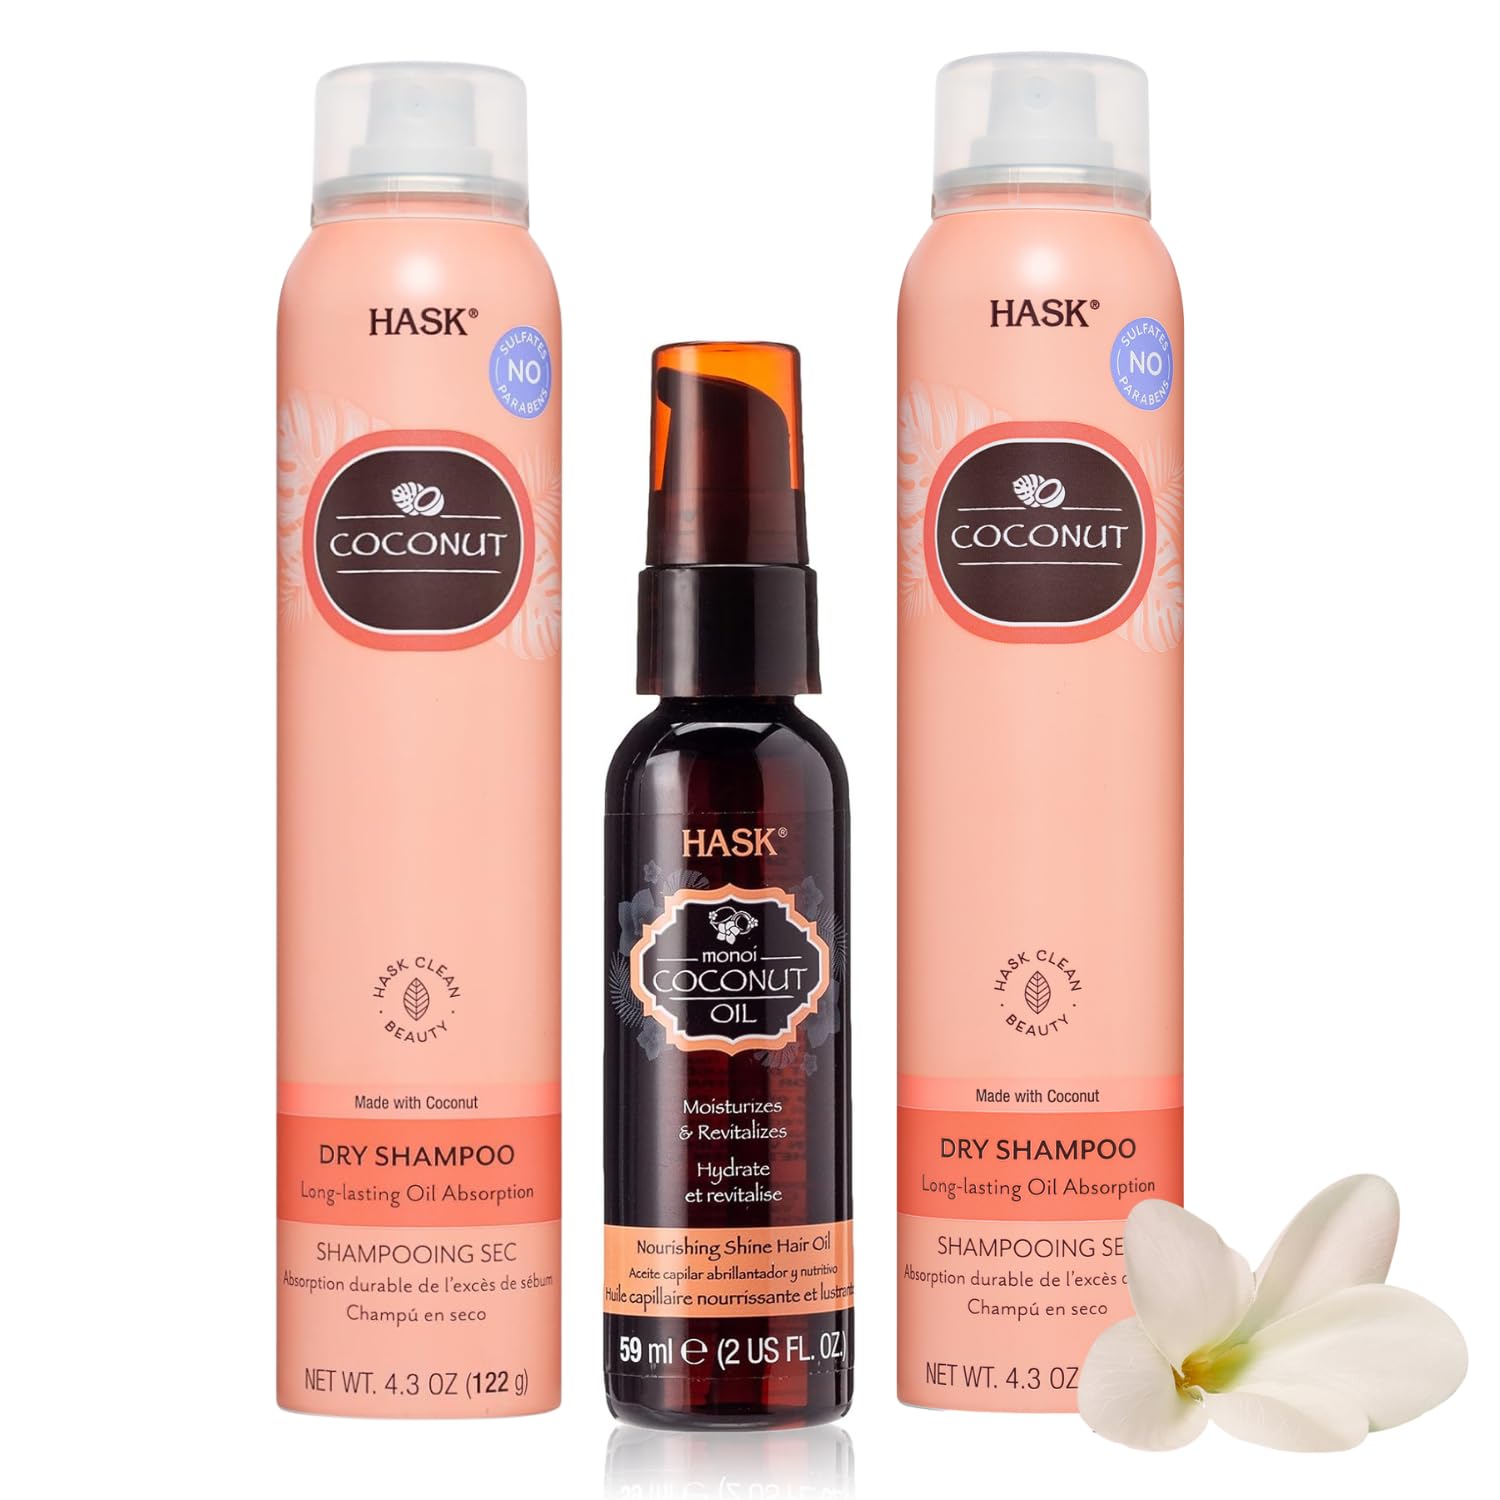 HASK Coconut Collection: 2 Coconut Nourishing Dry Shampoos and 1 Coconut Oil Nourishing Shine Oil